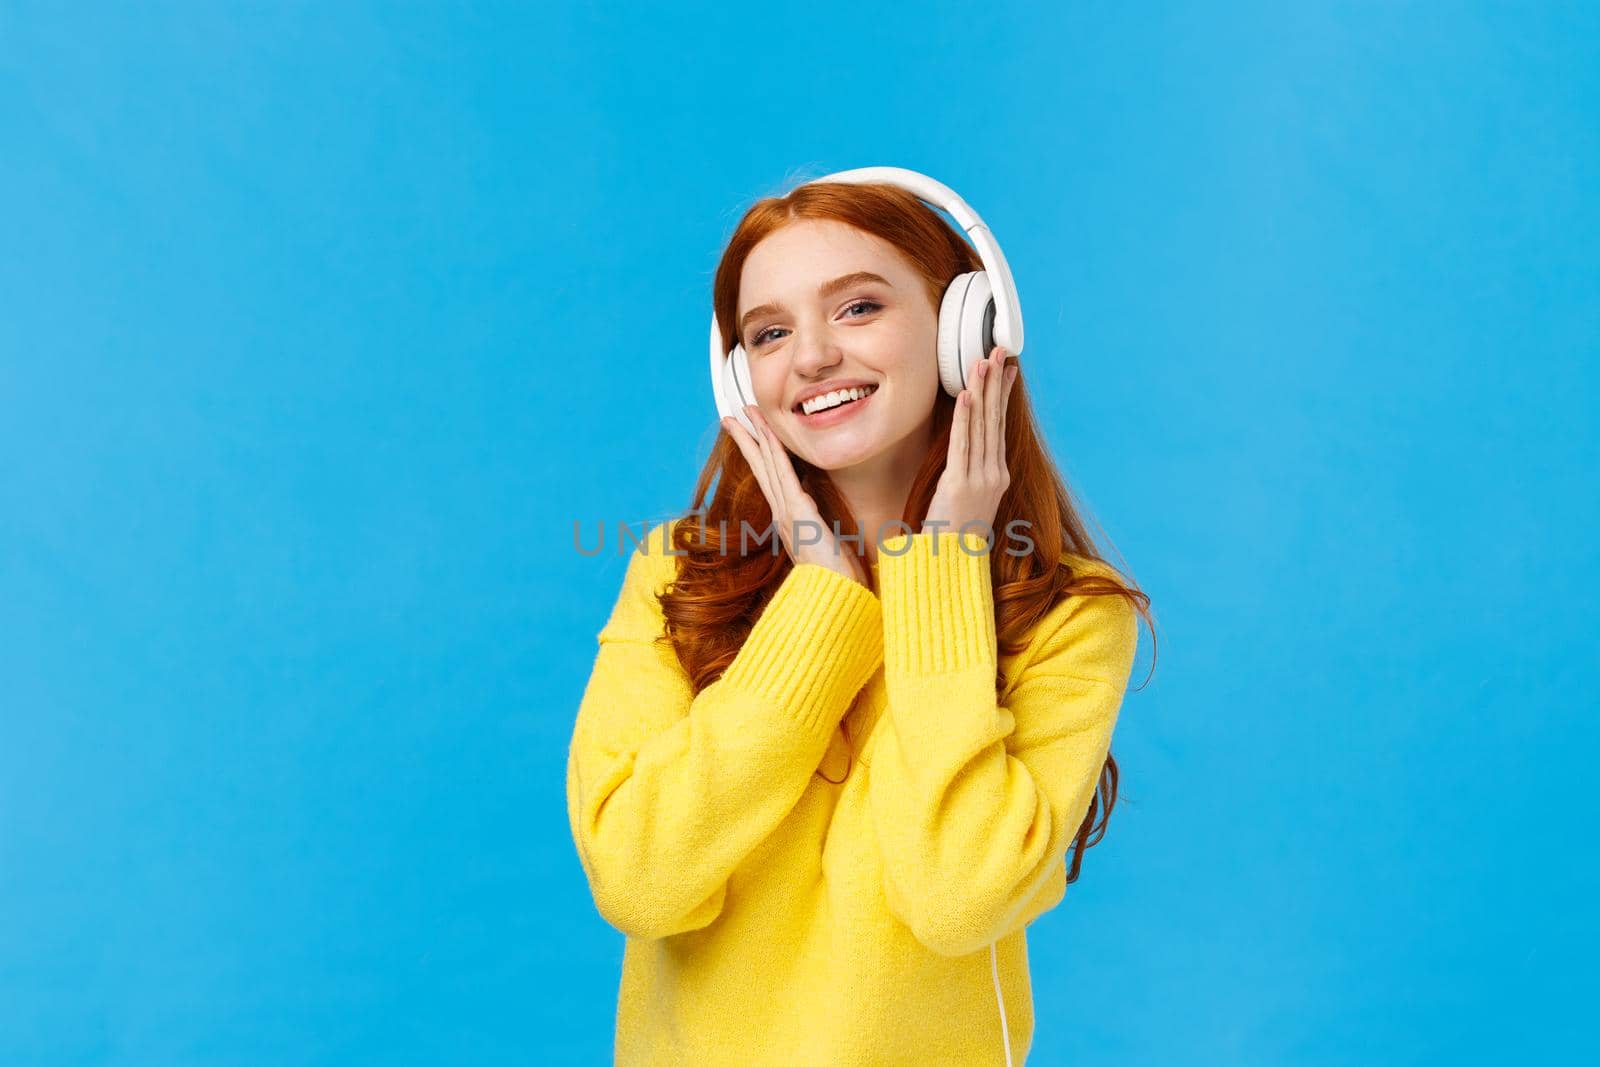 Fashionable attractive, carefree redhead woman in yellow sweater listening music with headphones, smiling tilting head joyfully, receive new earphones as christmas gift, standing blue background.